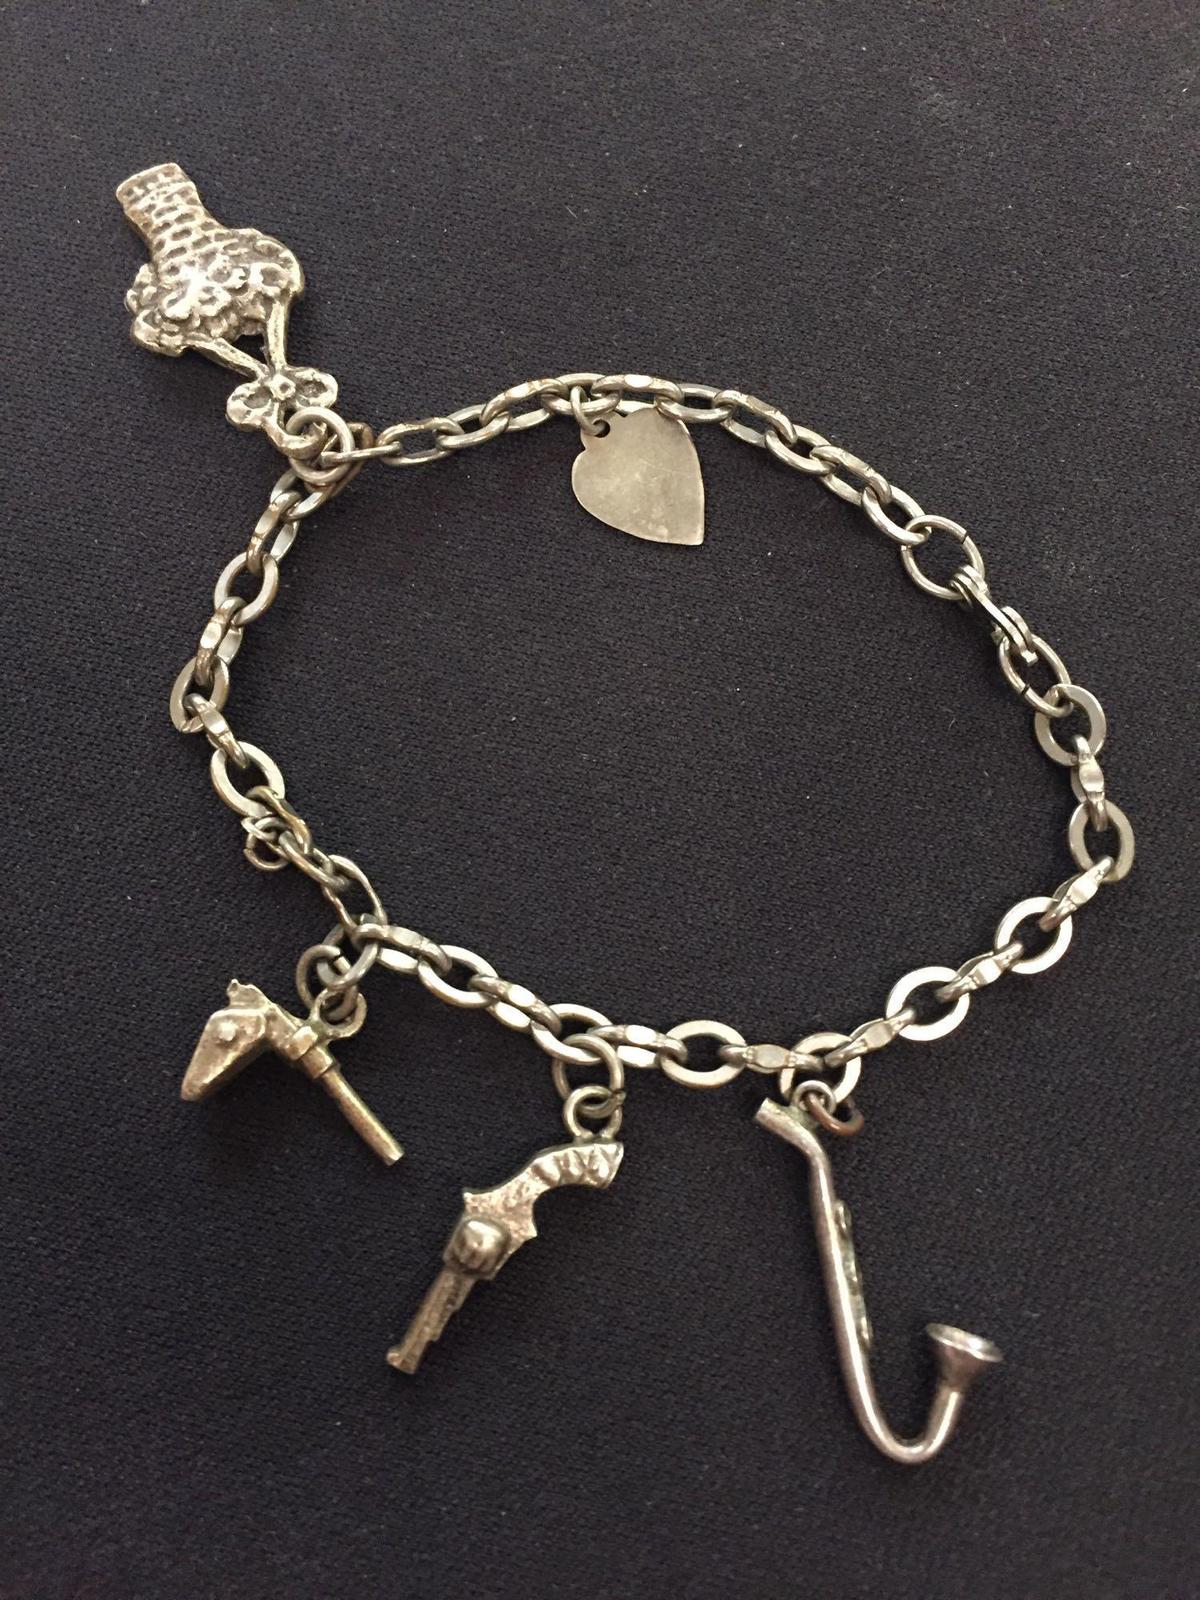 Sterling Silver 8" Cable Link Charm Bracelet w/ Charms